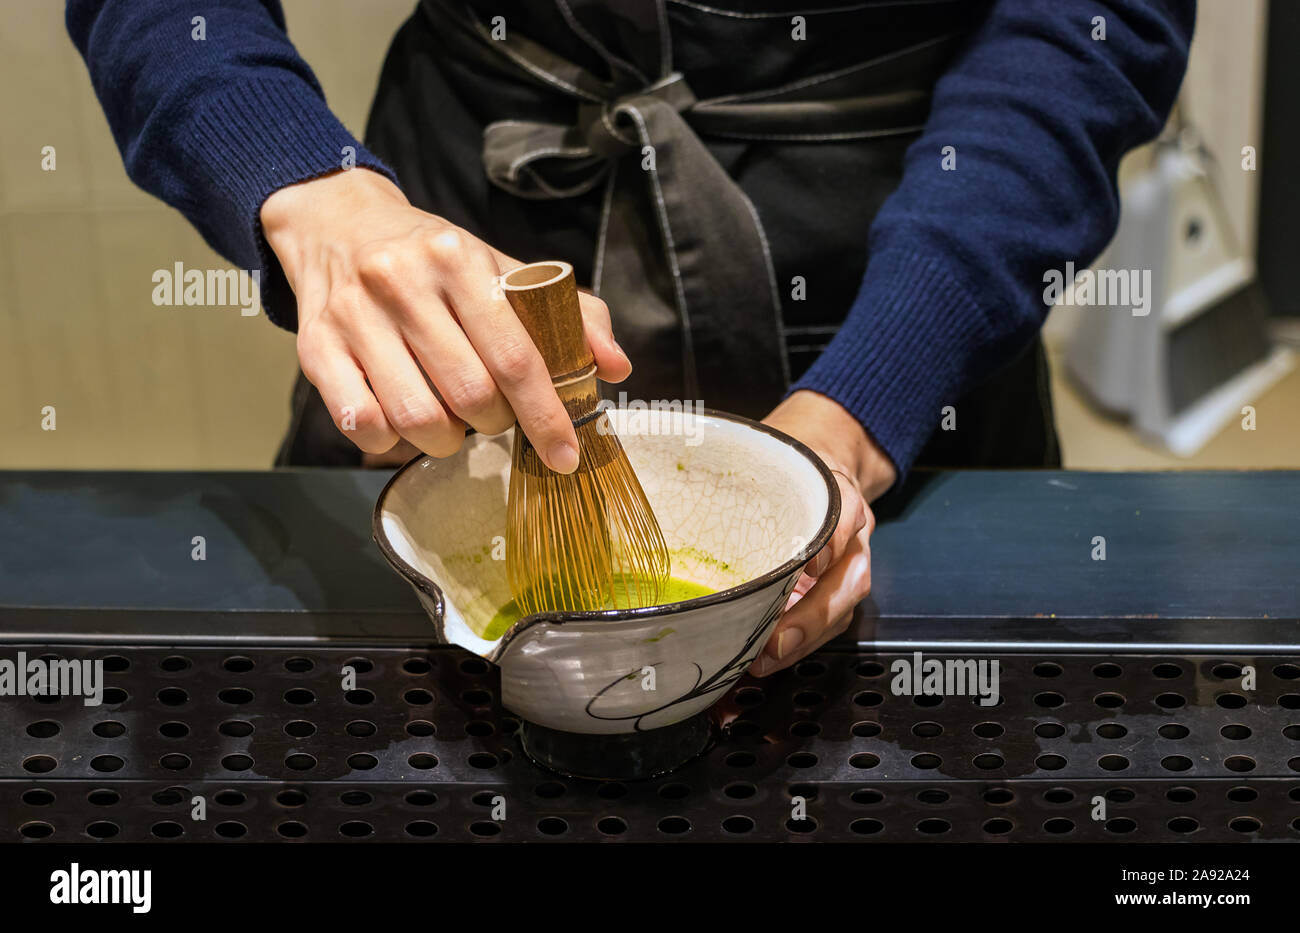 https://c8.alamy.com/comp/2A92A24/female-barista-hands-preparing-matcha-tea-on-a-bowl-mixing-it-with-a-bamboo-whisk-in-busan-korea-2A92A24.jpg